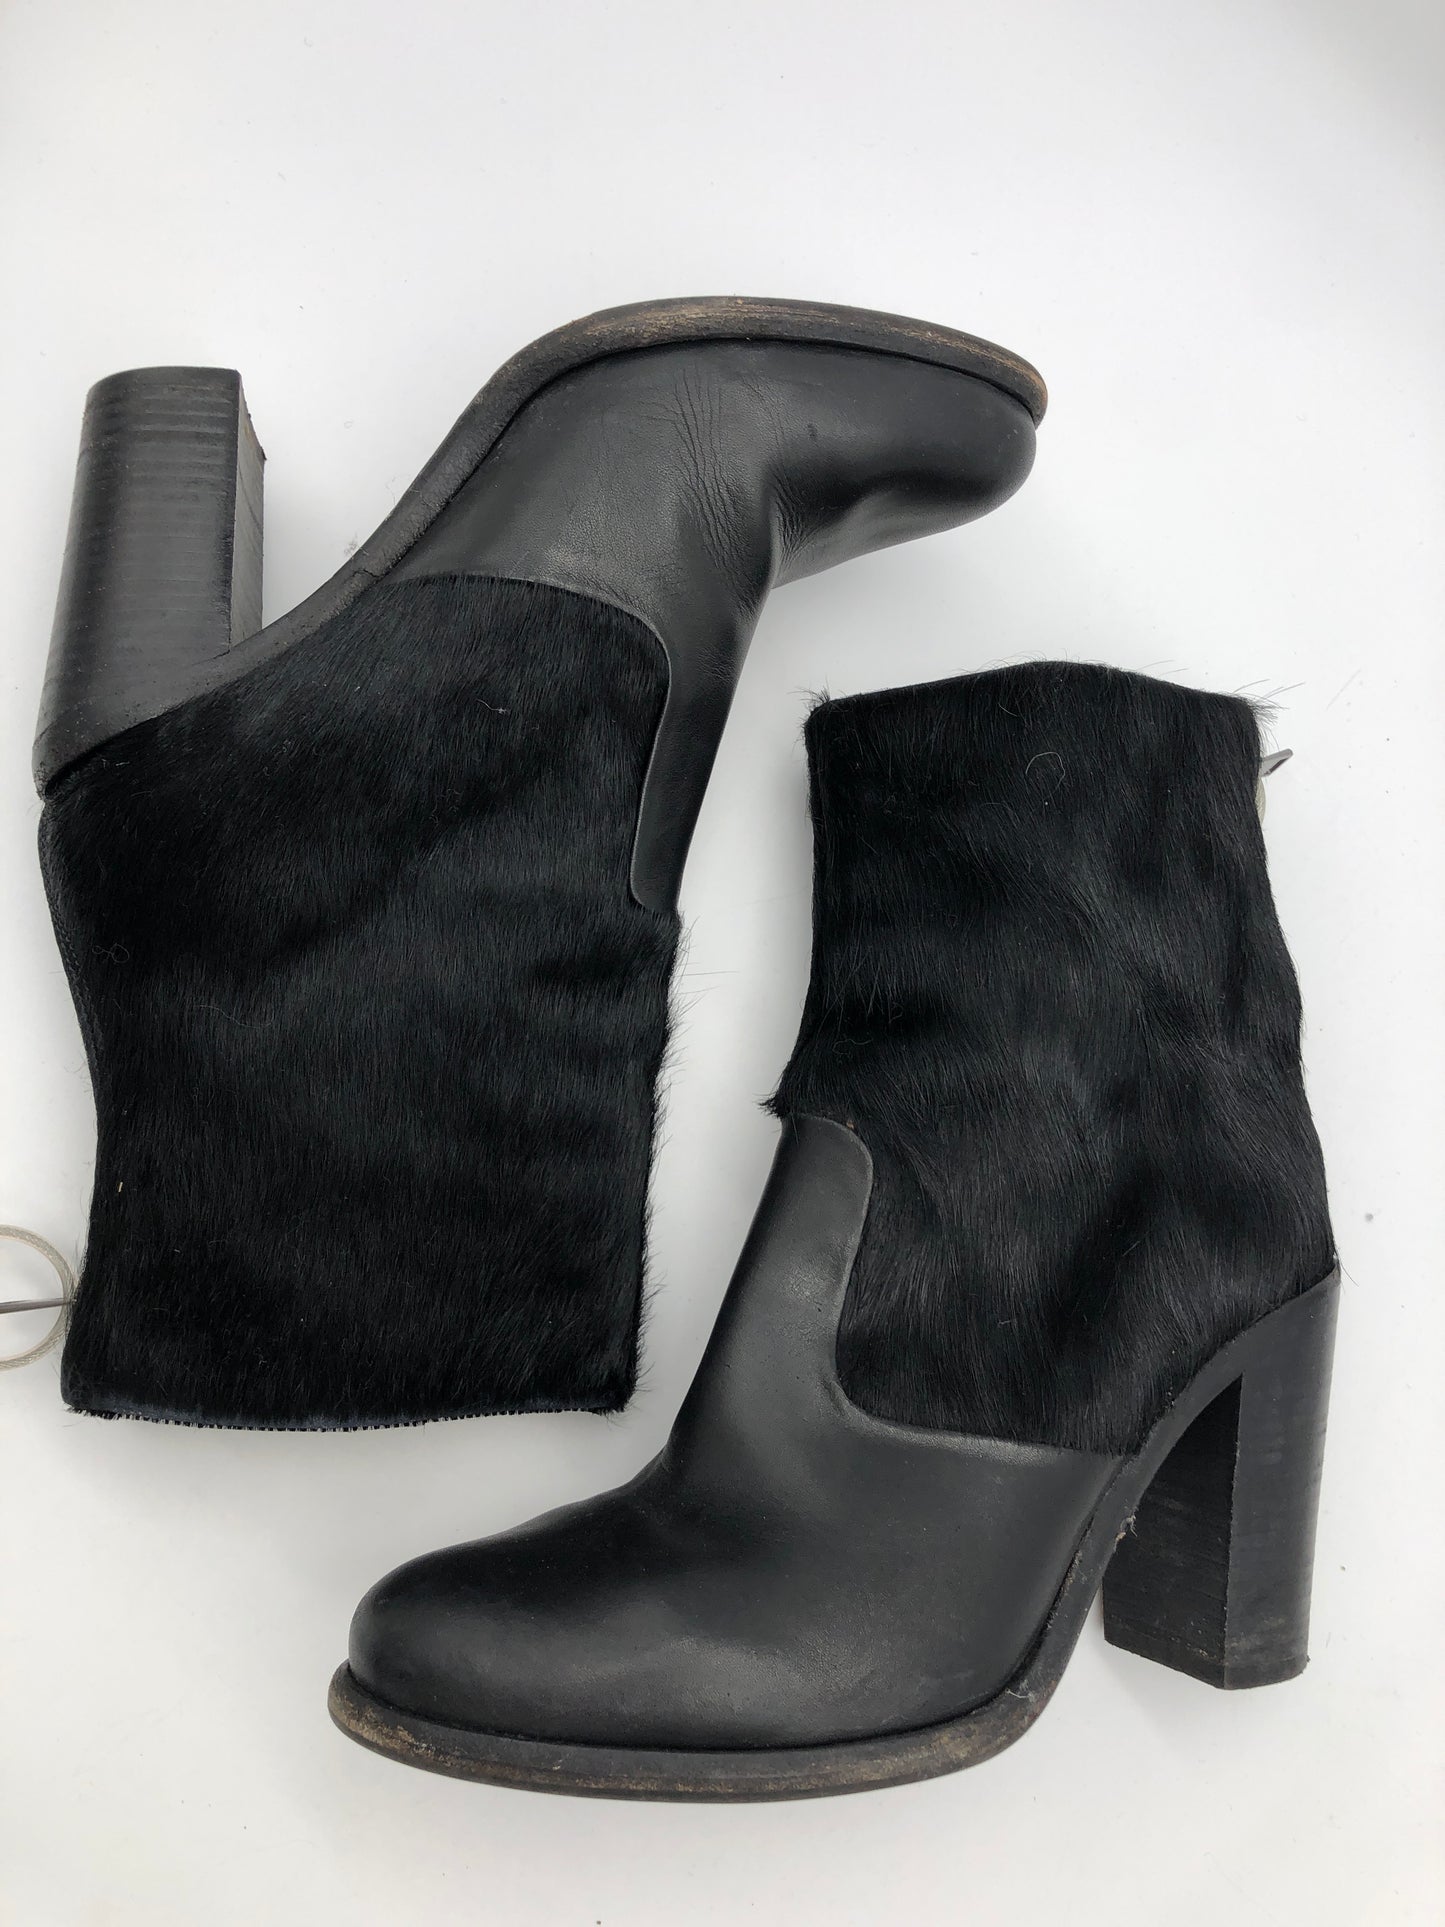 Boots Ankle Heels By All Saints  Size: 9.5